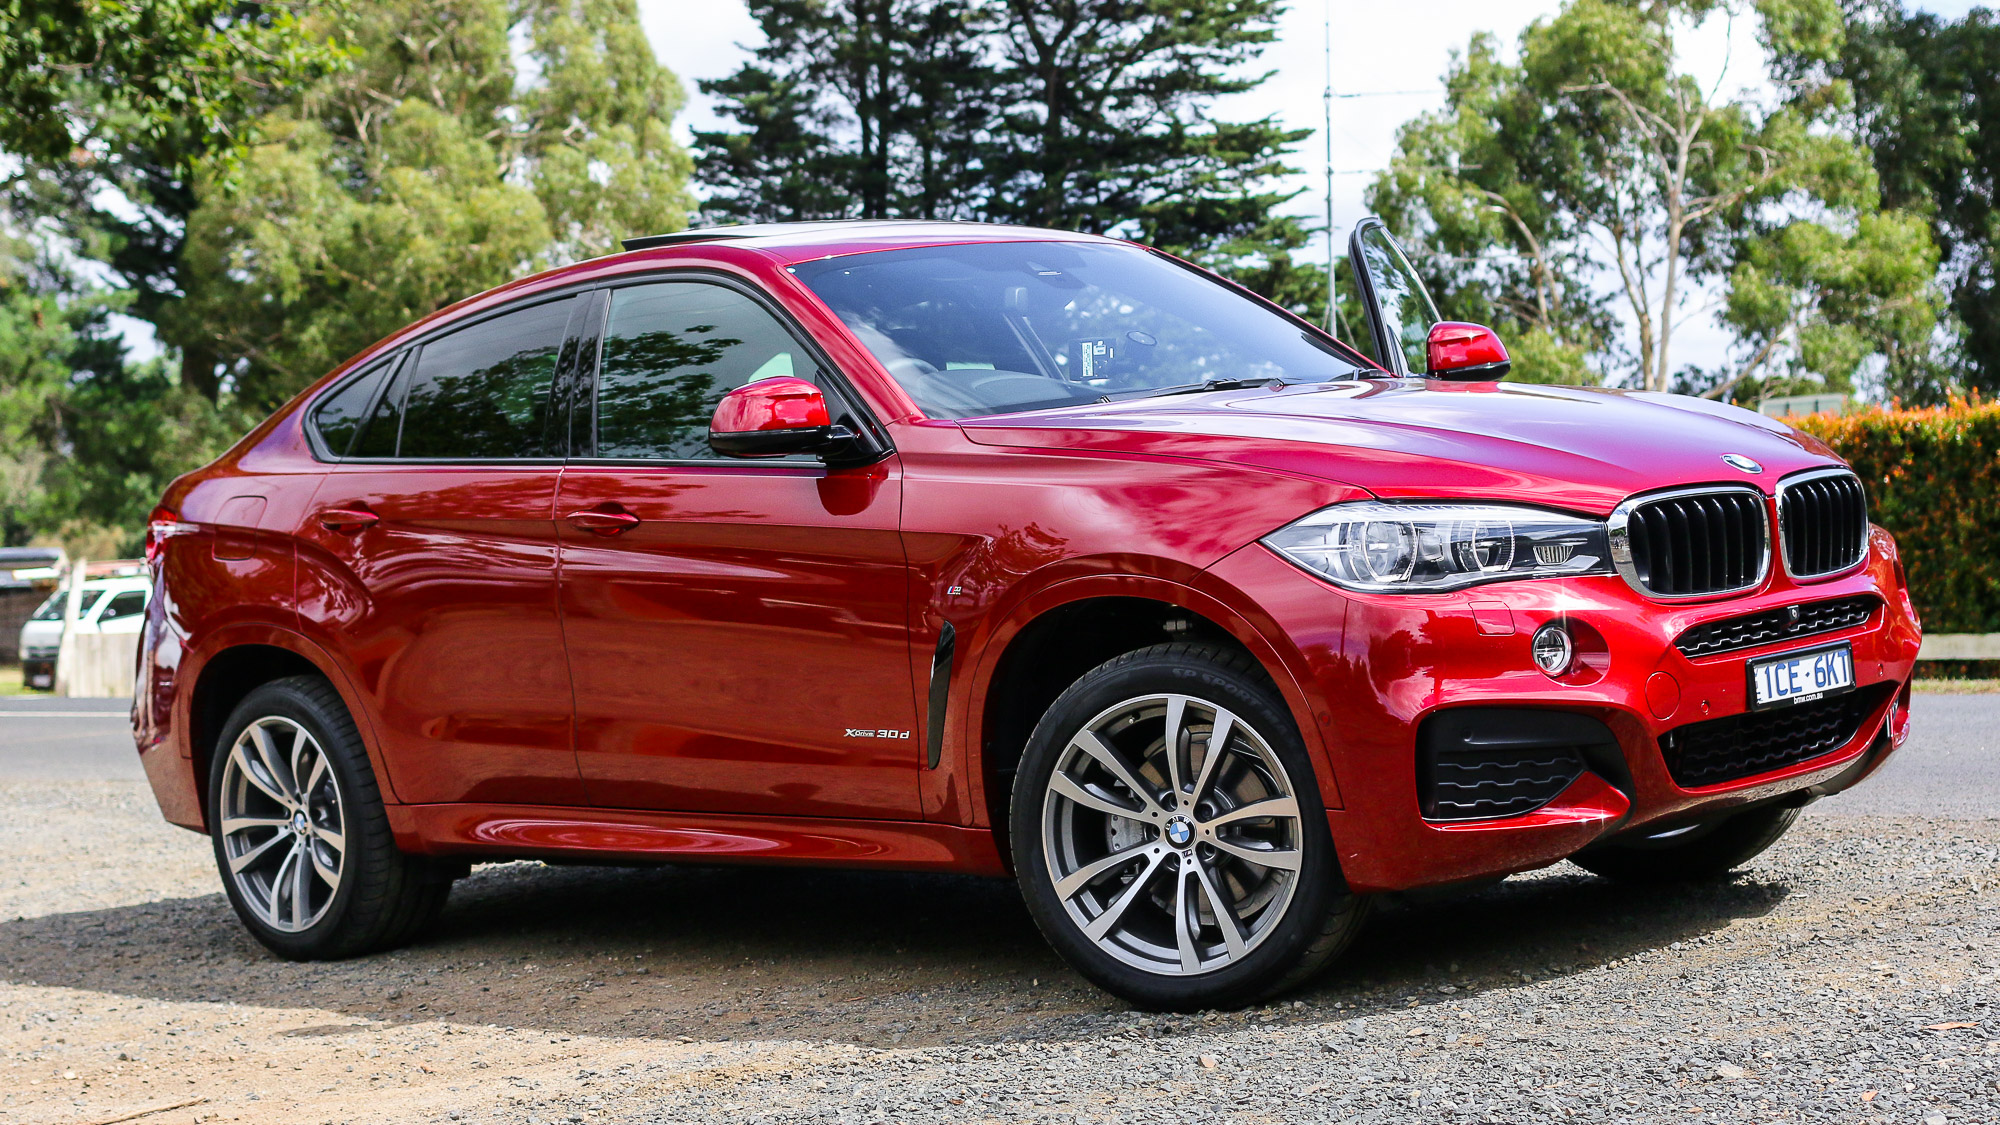 2015 BMW X6 pricing and specifications - Photos (1 of 7)